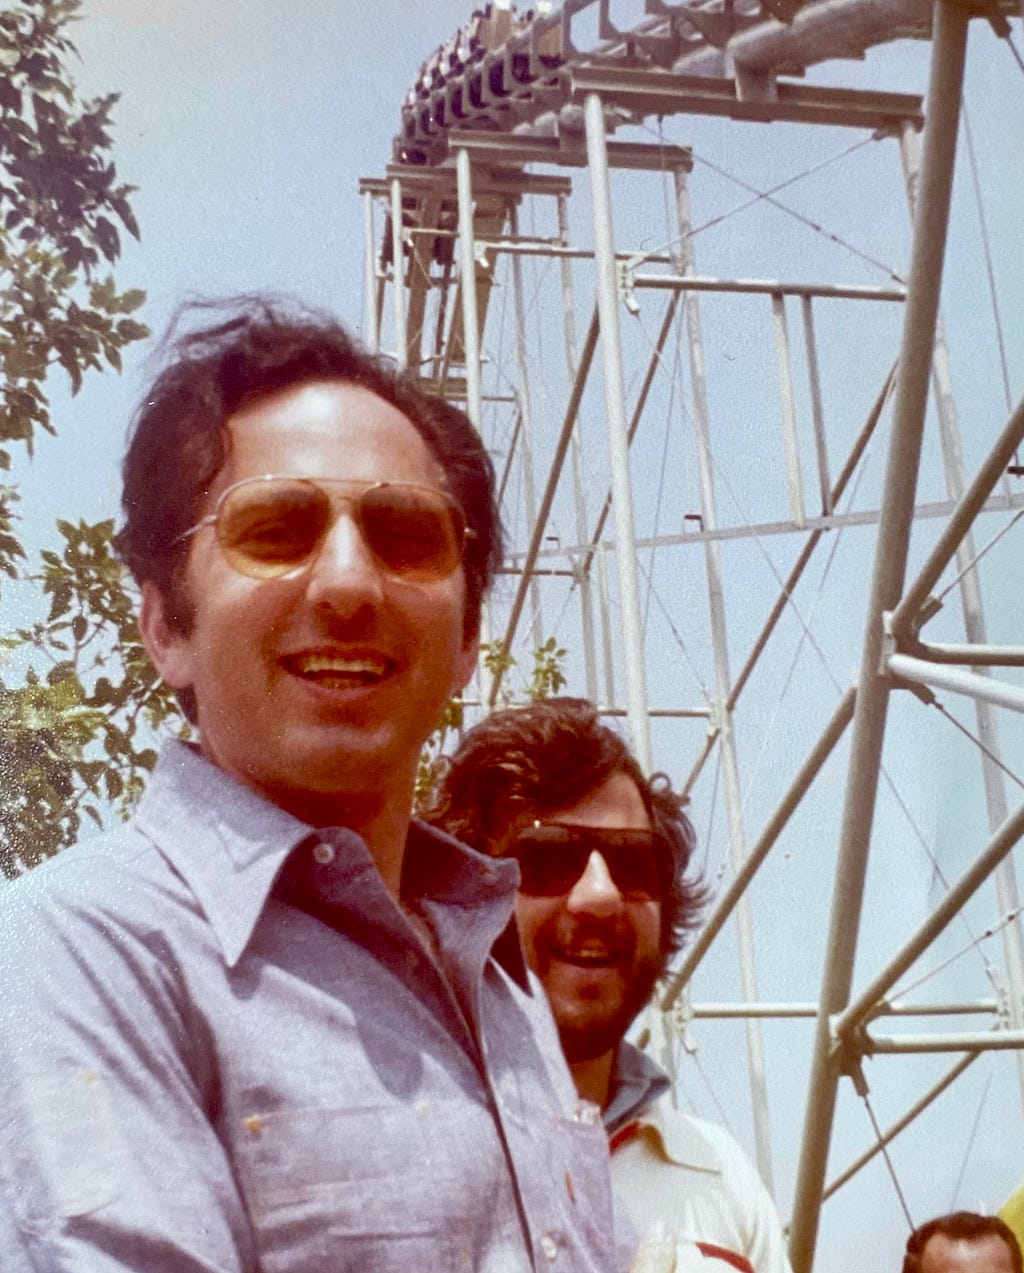 Two men with dark hair, both in sunglasses, in front of a steel structure smiling.